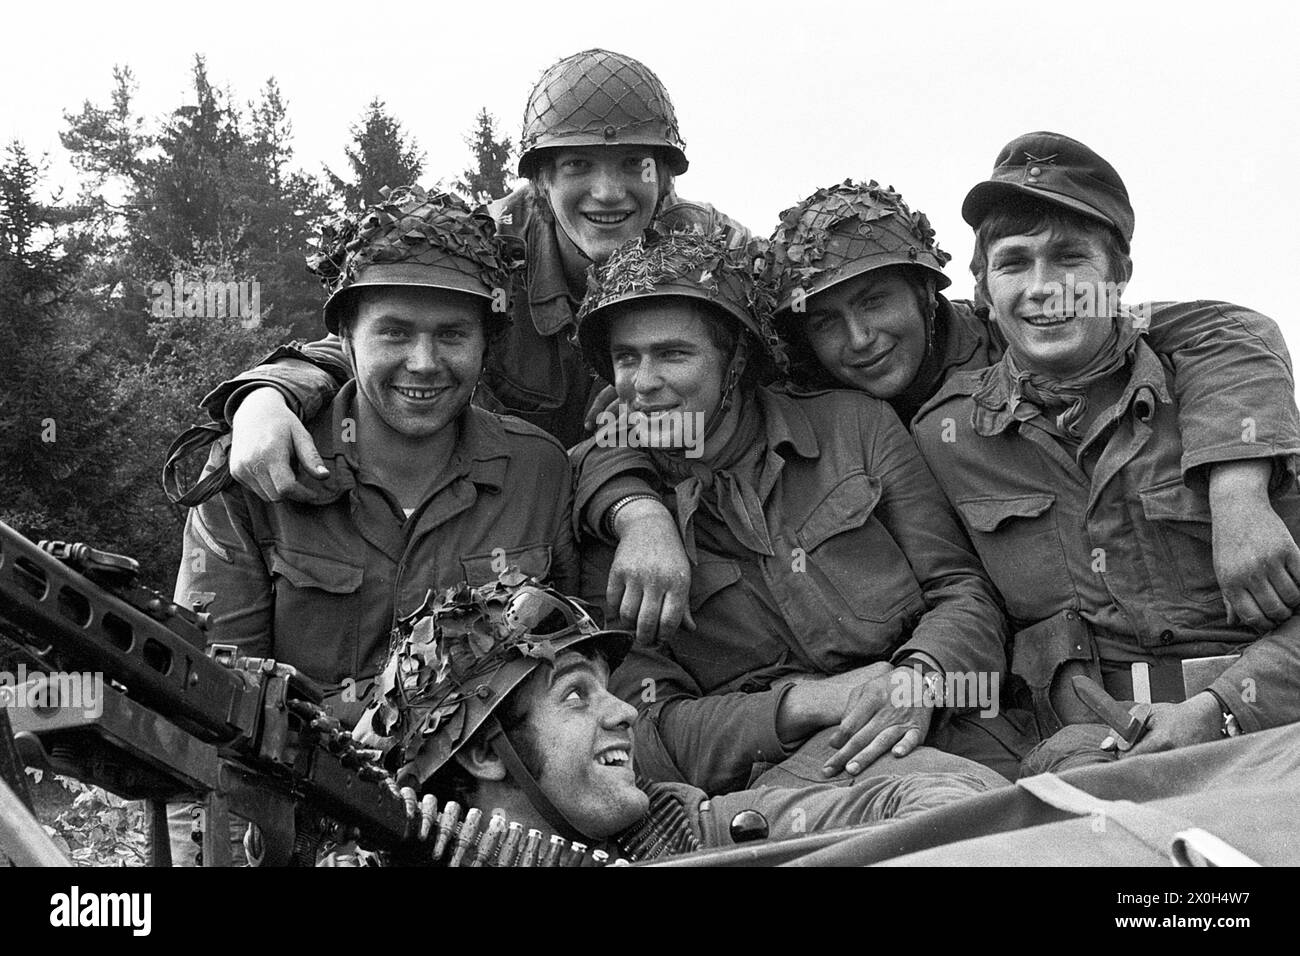 During a military exercise of the II Corps of the German Armed Forces in the Swabian Alb, a troop of cheerful soldiers in uniform pose for the camera. They are wearing field suits and combat helmets. A machine gun can be seen on the left edge of the picture. [automated translation] Stock Photo